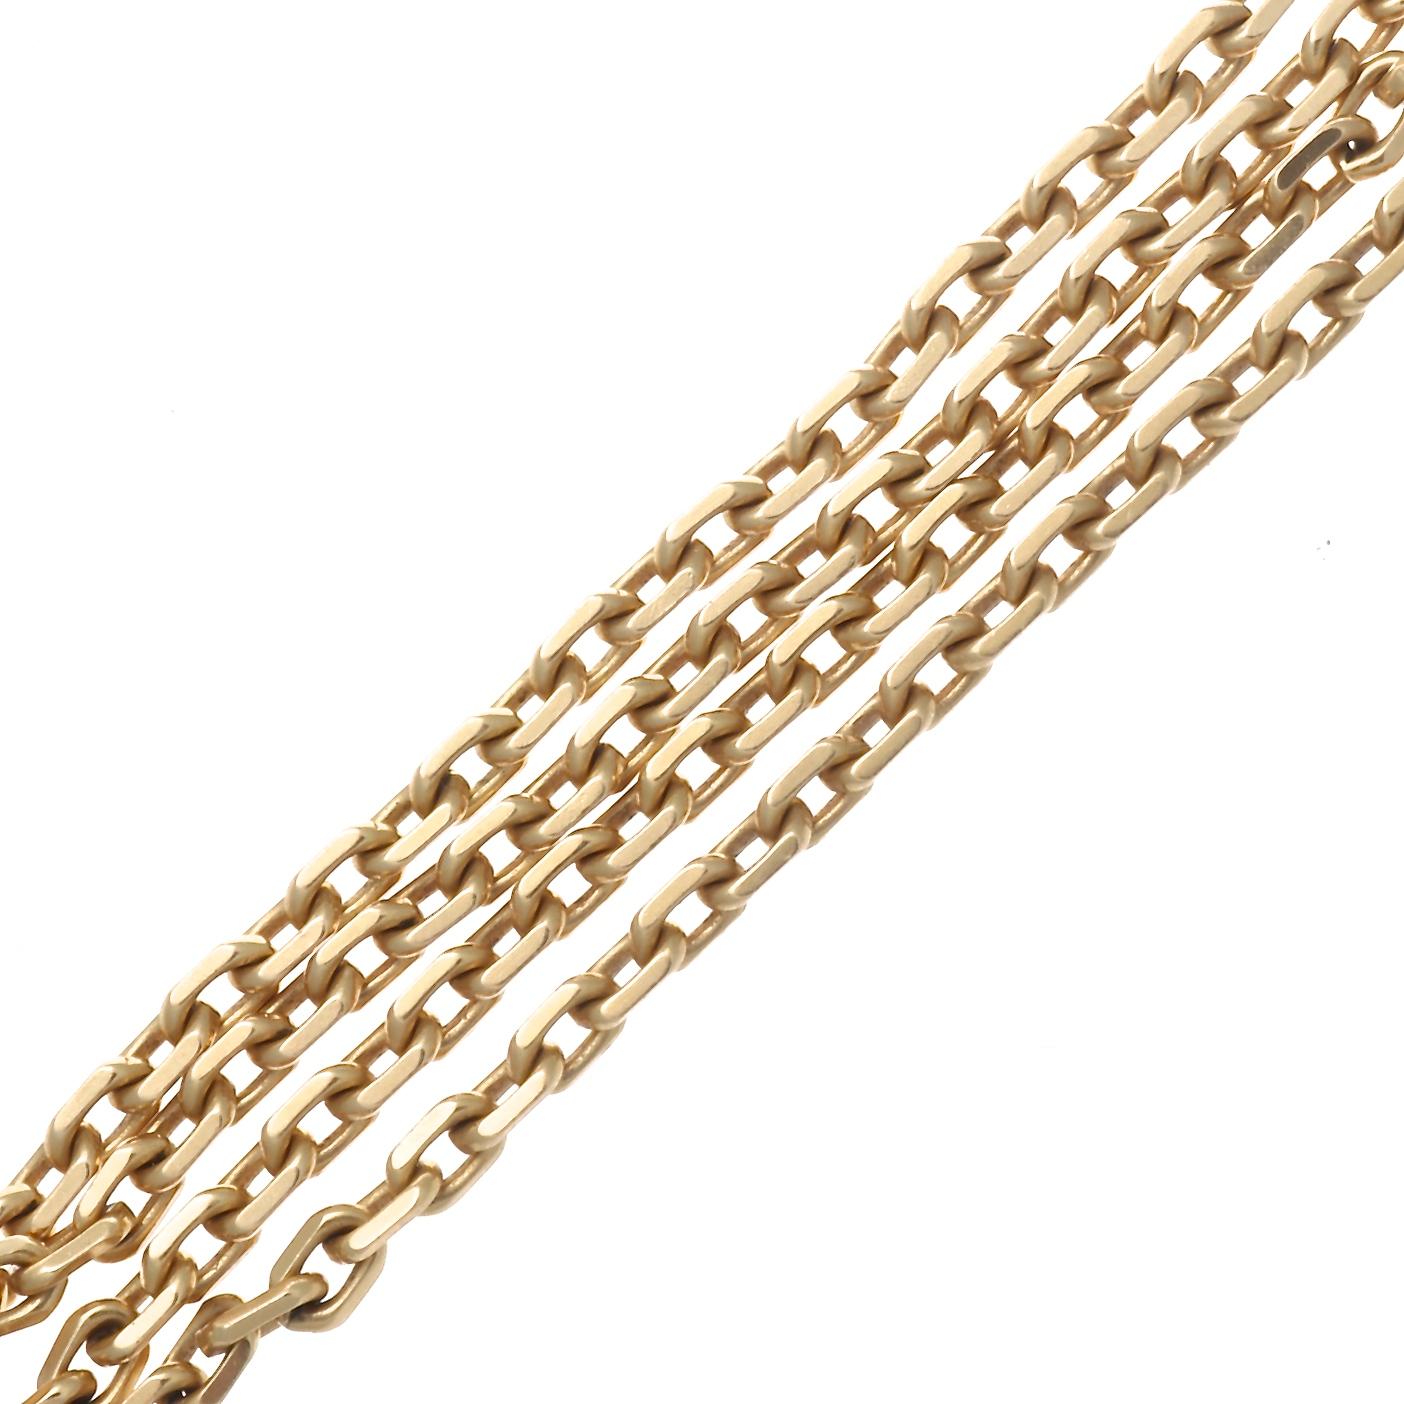 Boucheron Paris 18k yellow gold chain, featuring solid oval links. 29 inches long. 34.6 grams. Signed Boucheron Paris, serial #55311.